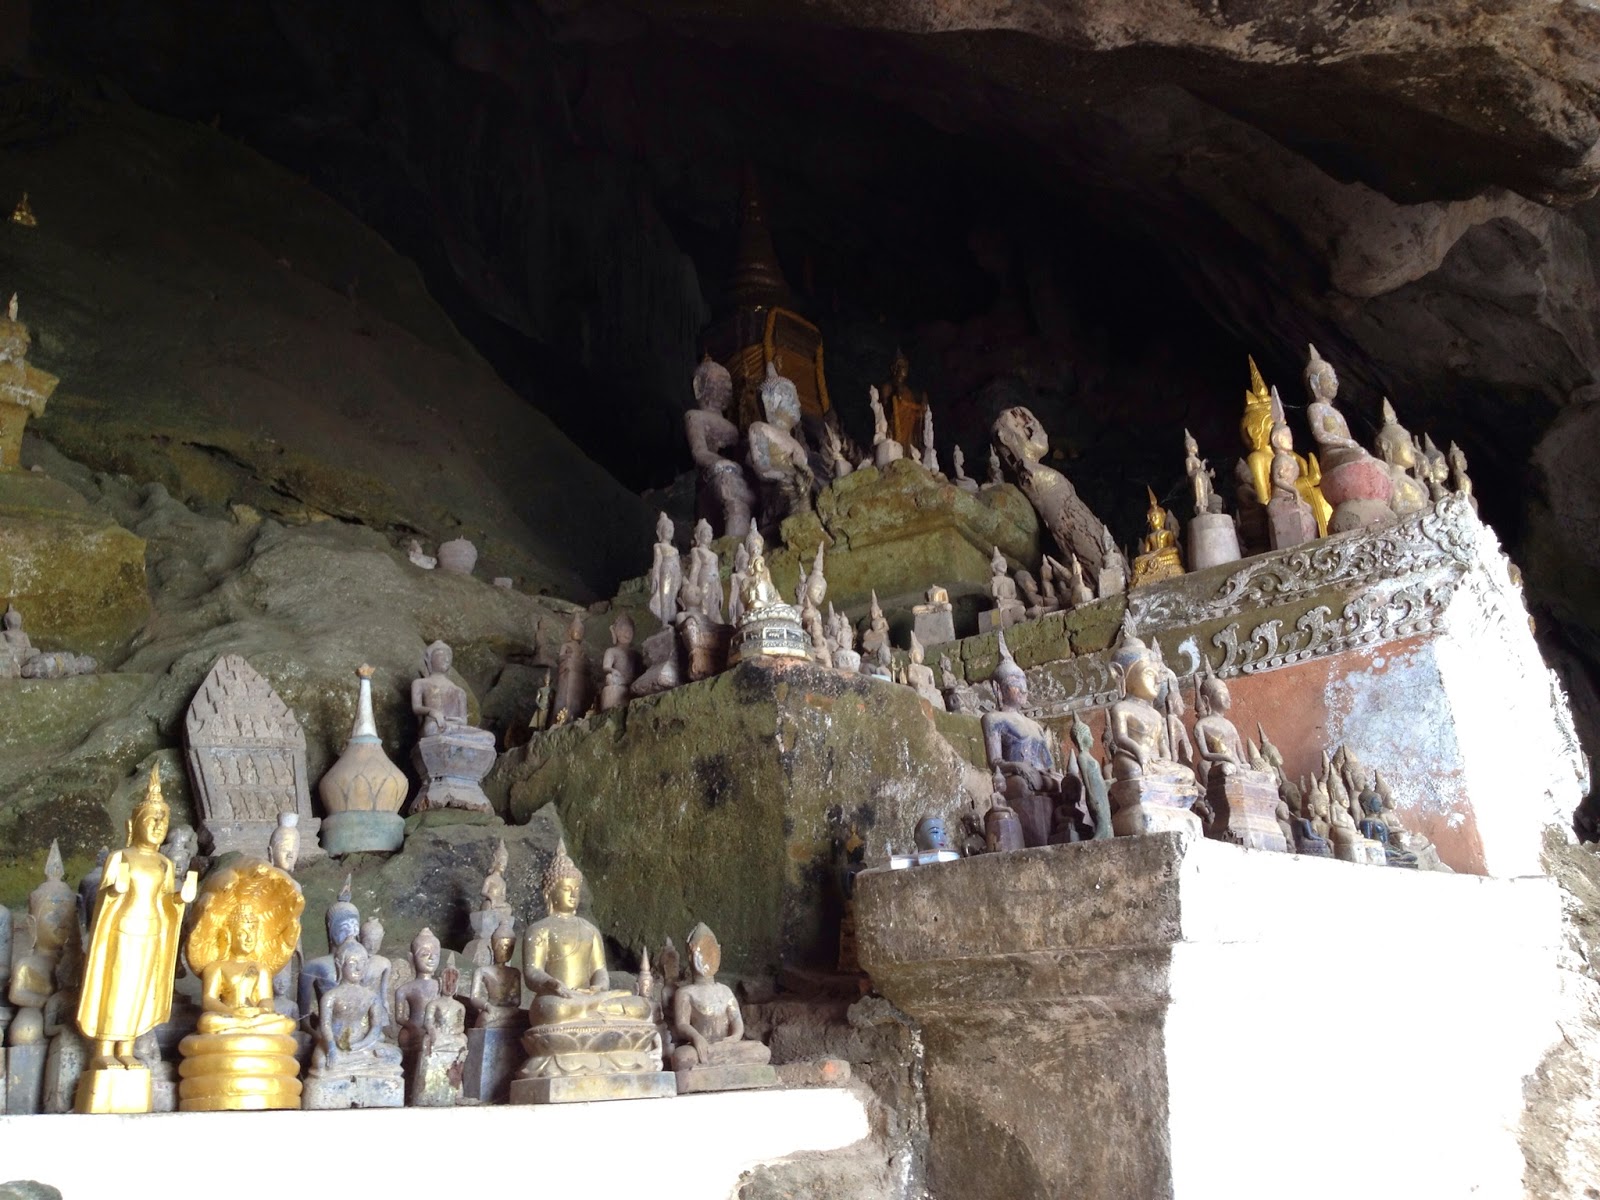 Luang Prabang - The first cave housed hundreds of small buddhas